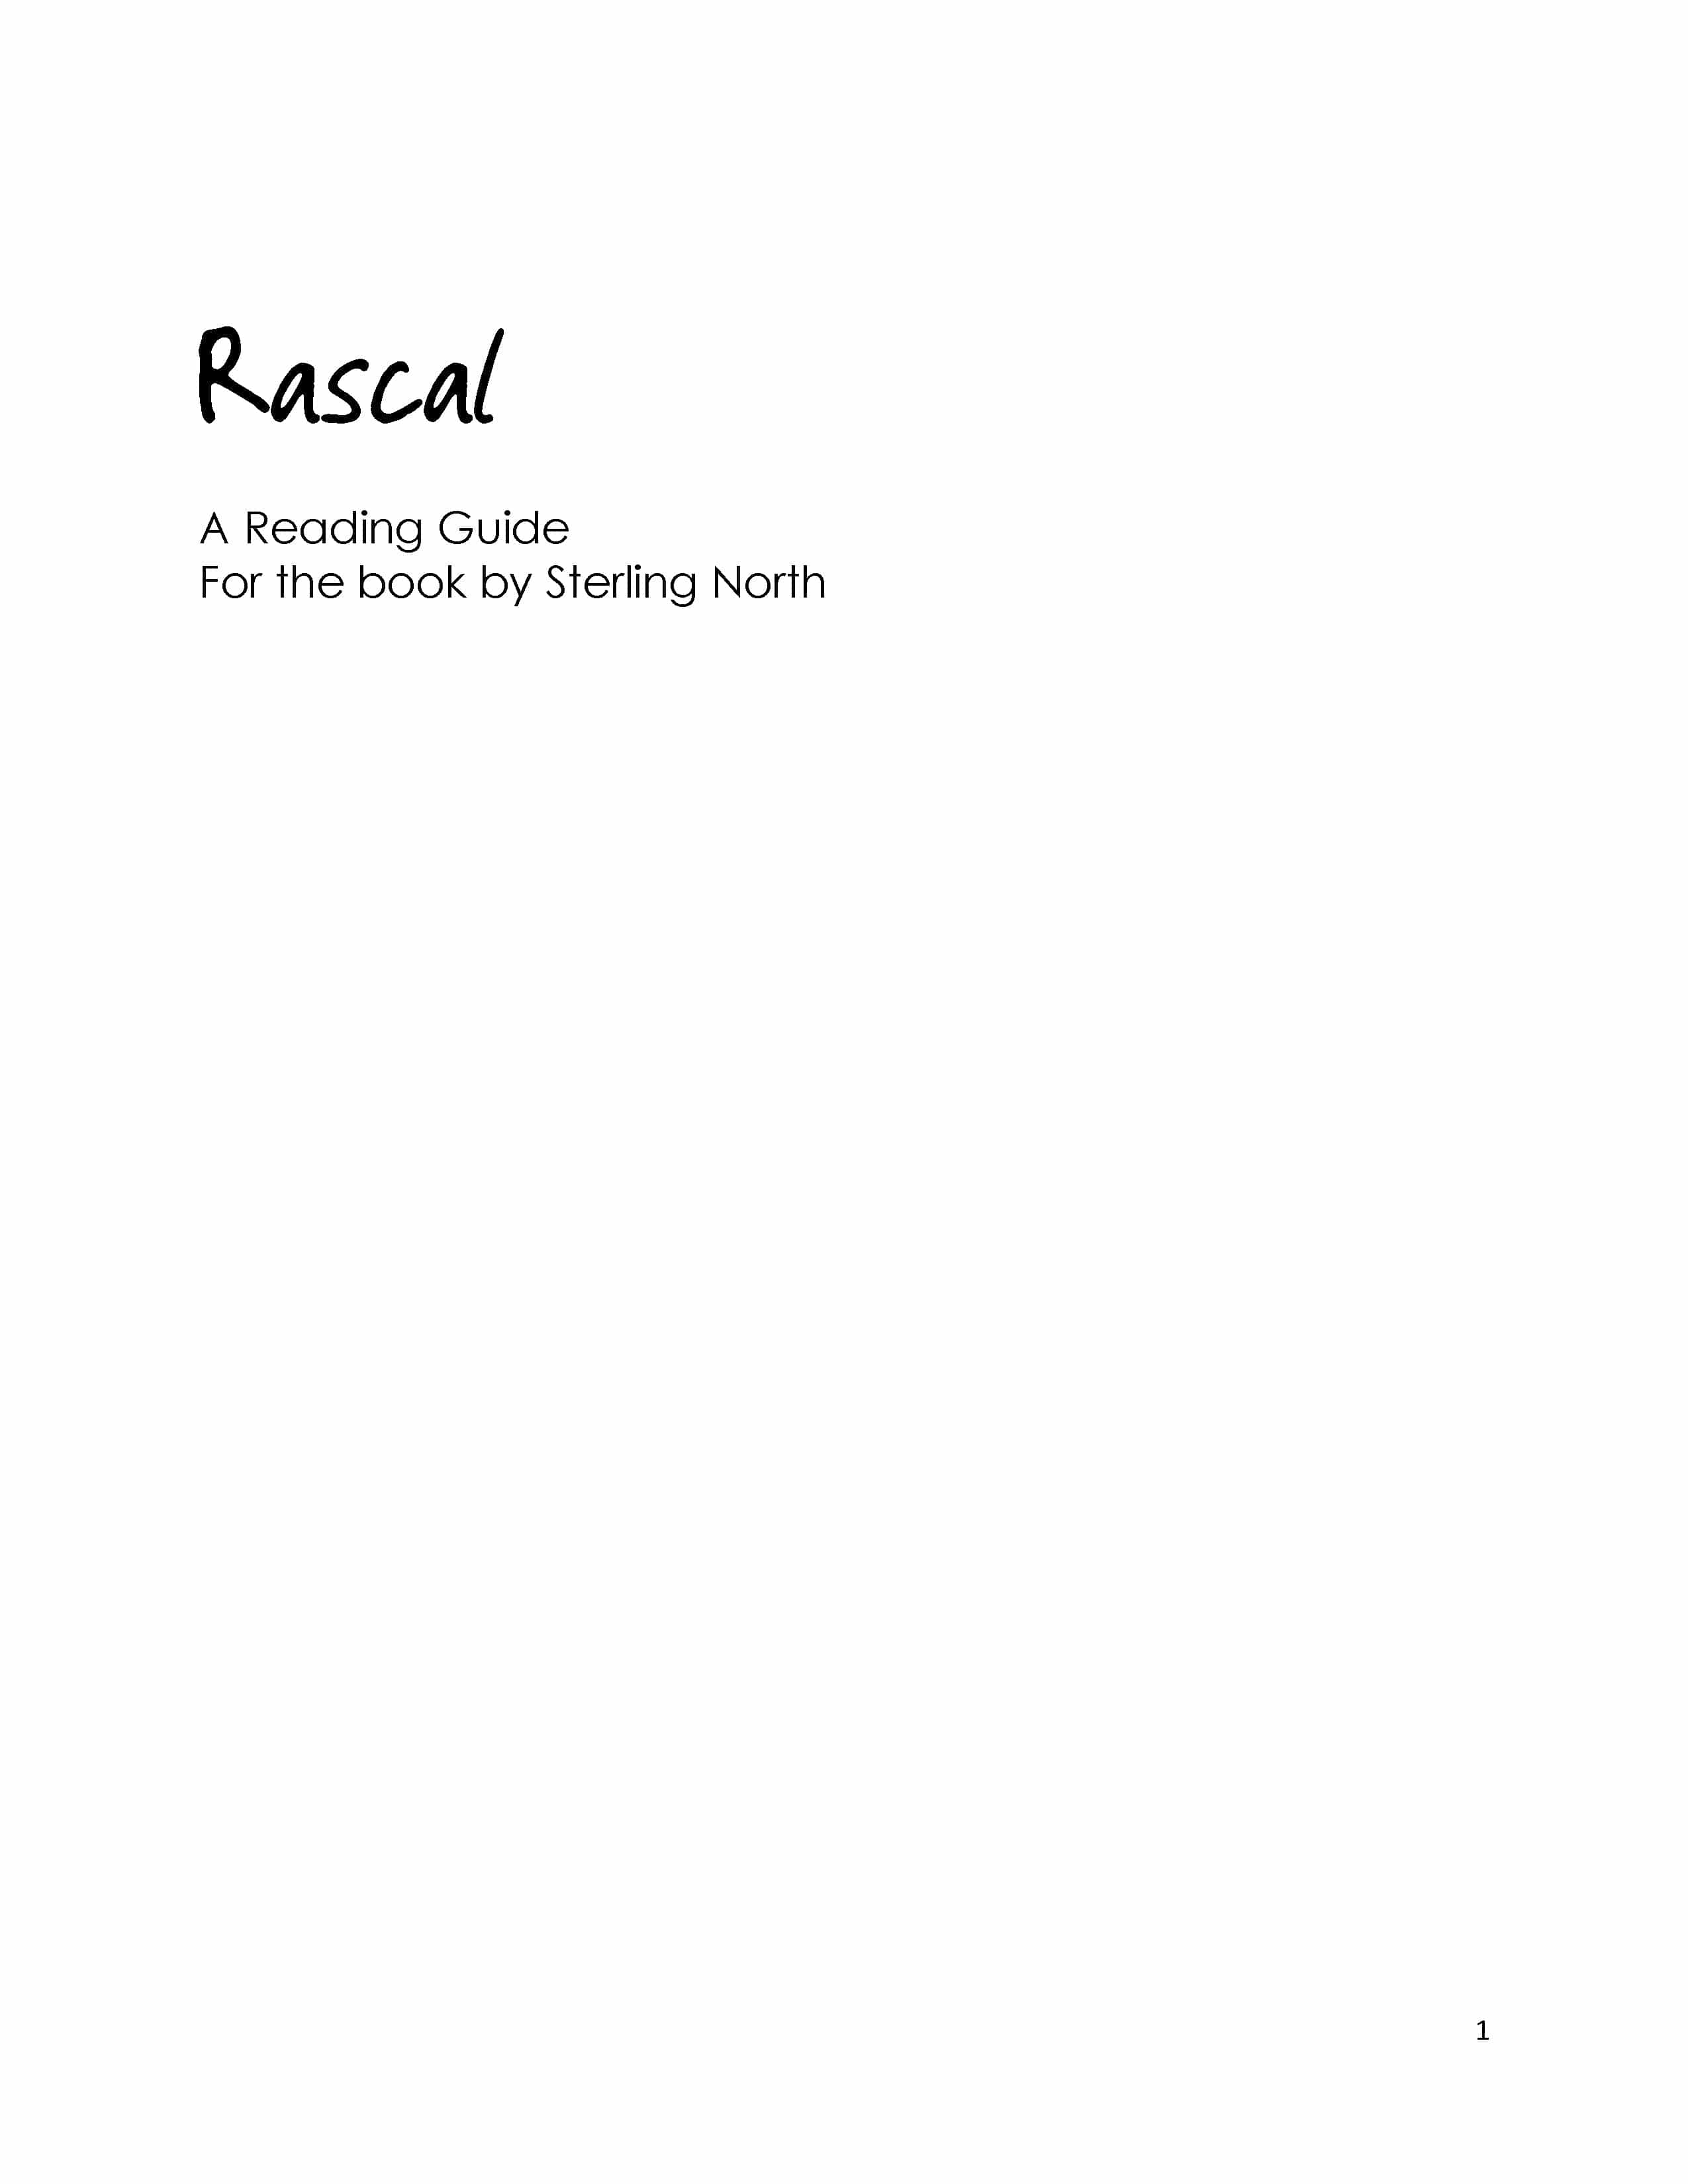 Rascal Reading Guide (Download)